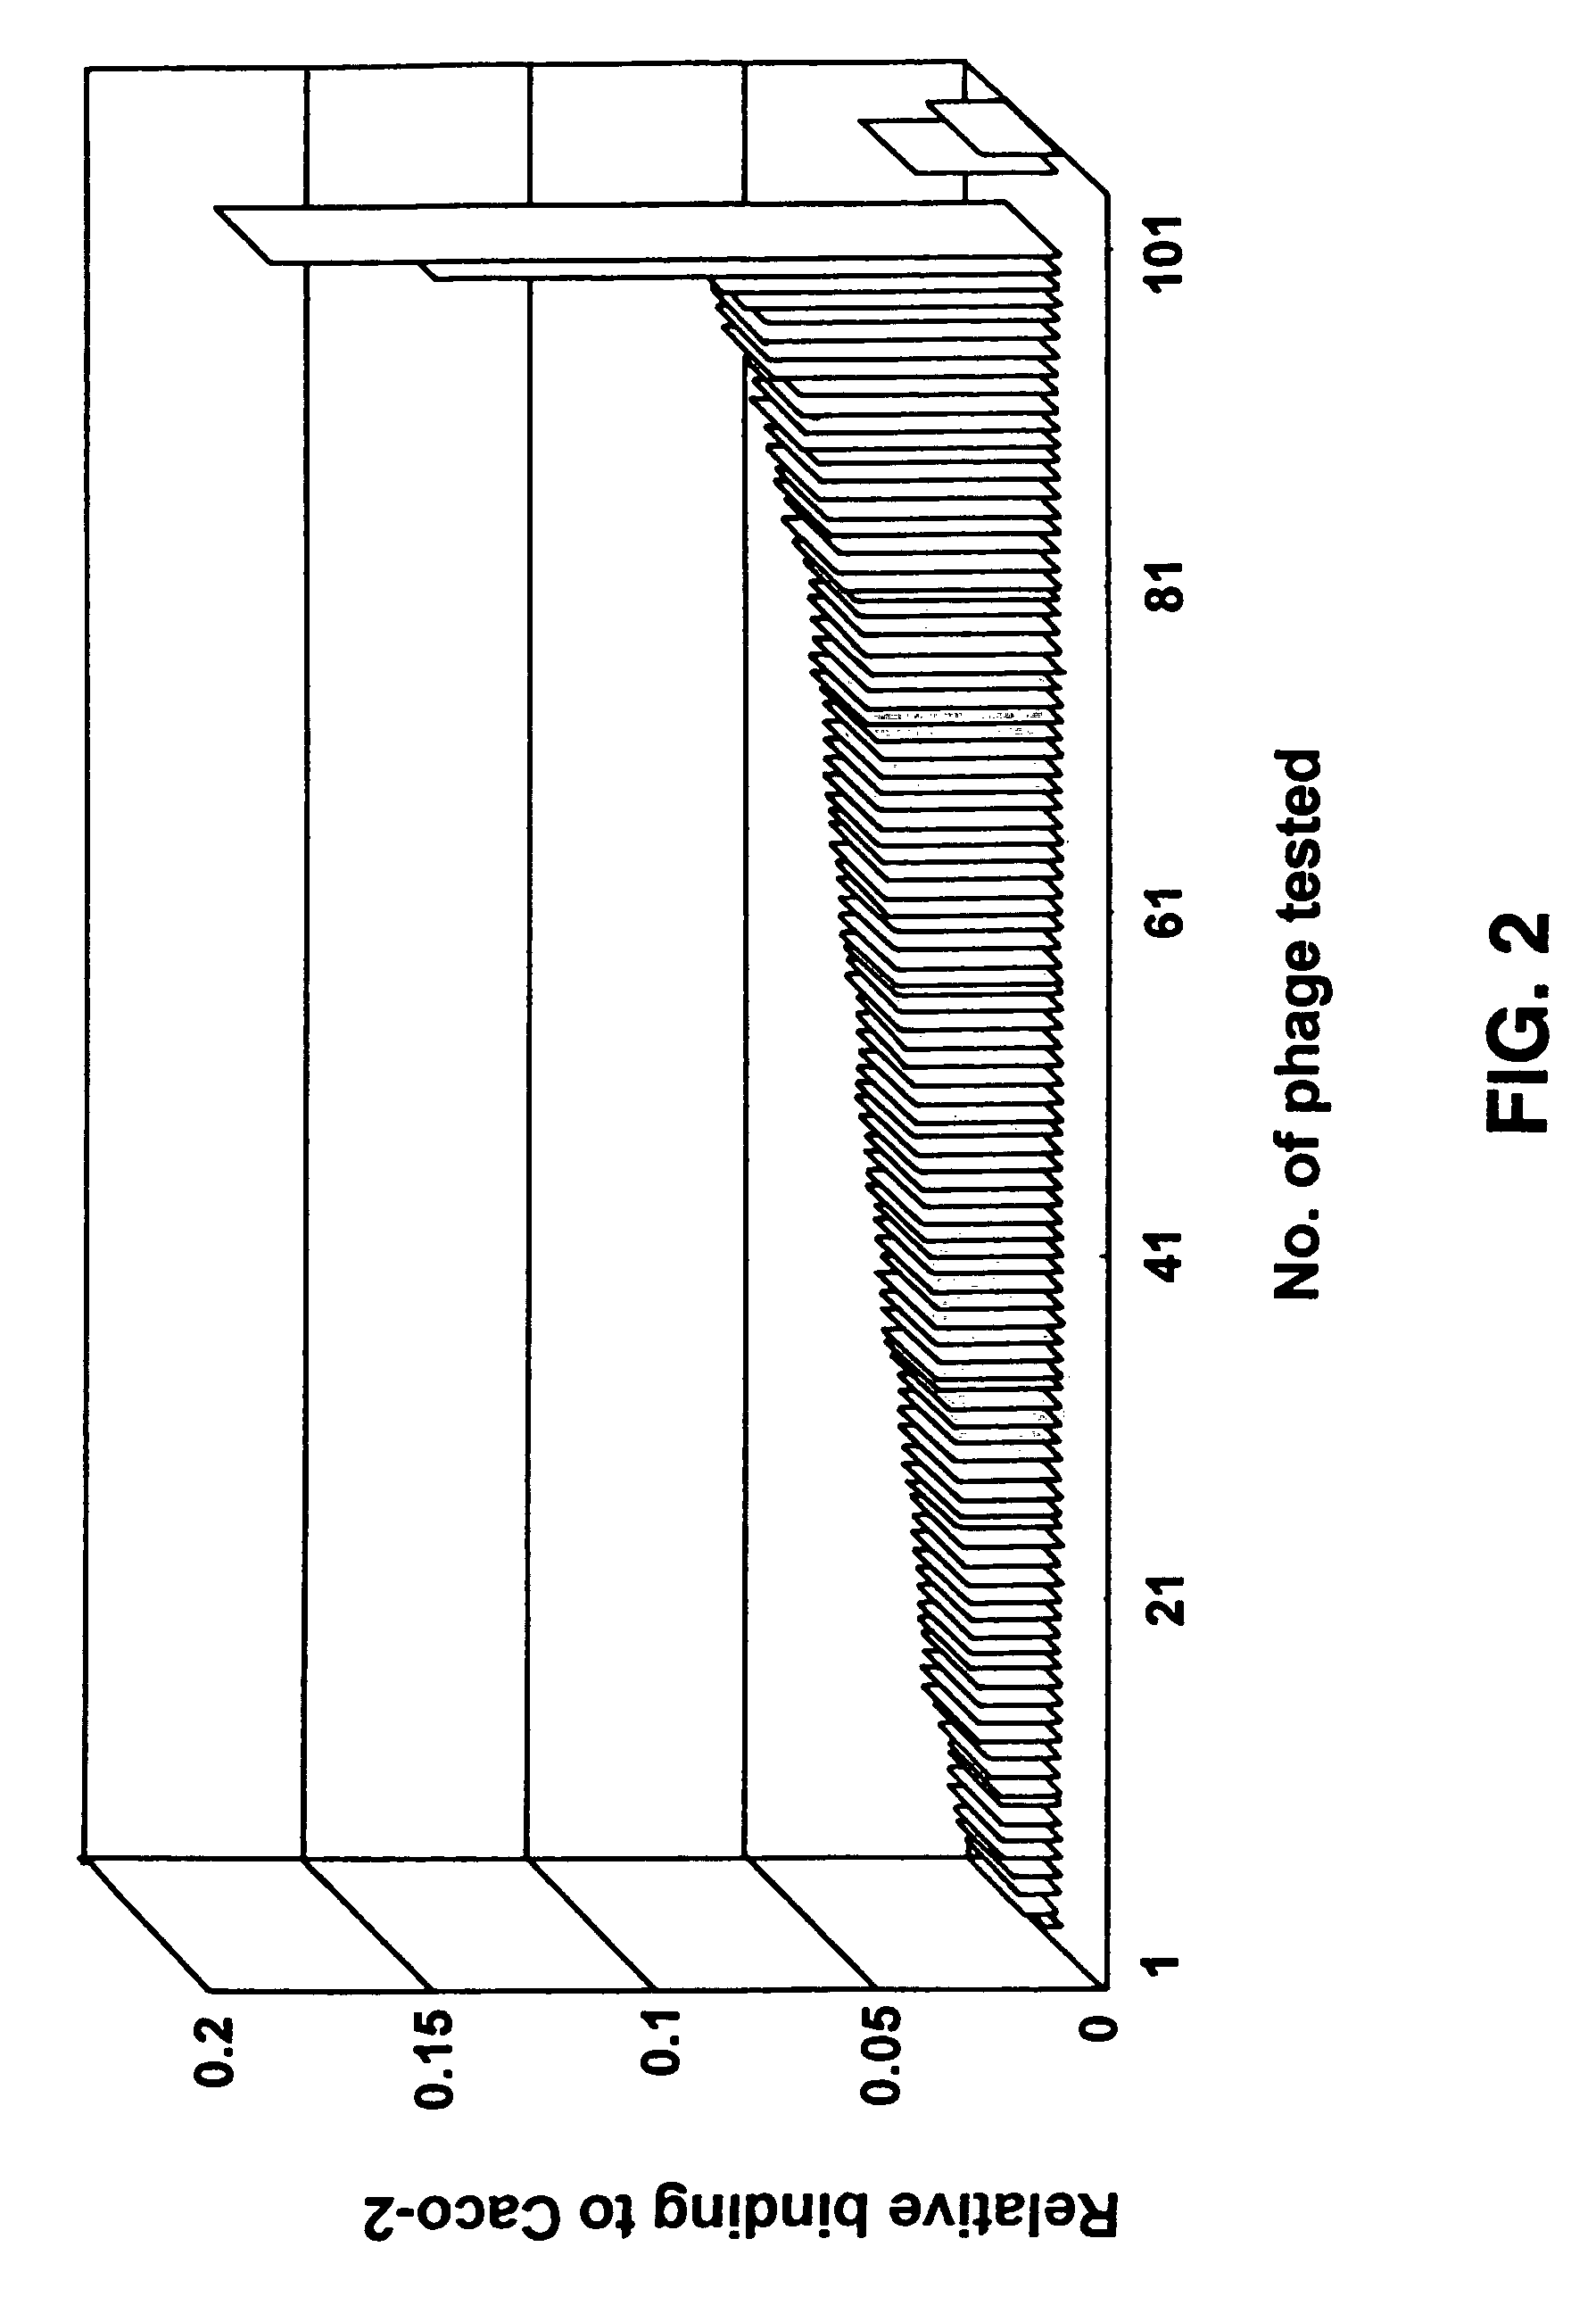 Peptides which enhance transport across tissues and methods of identifying and using the same